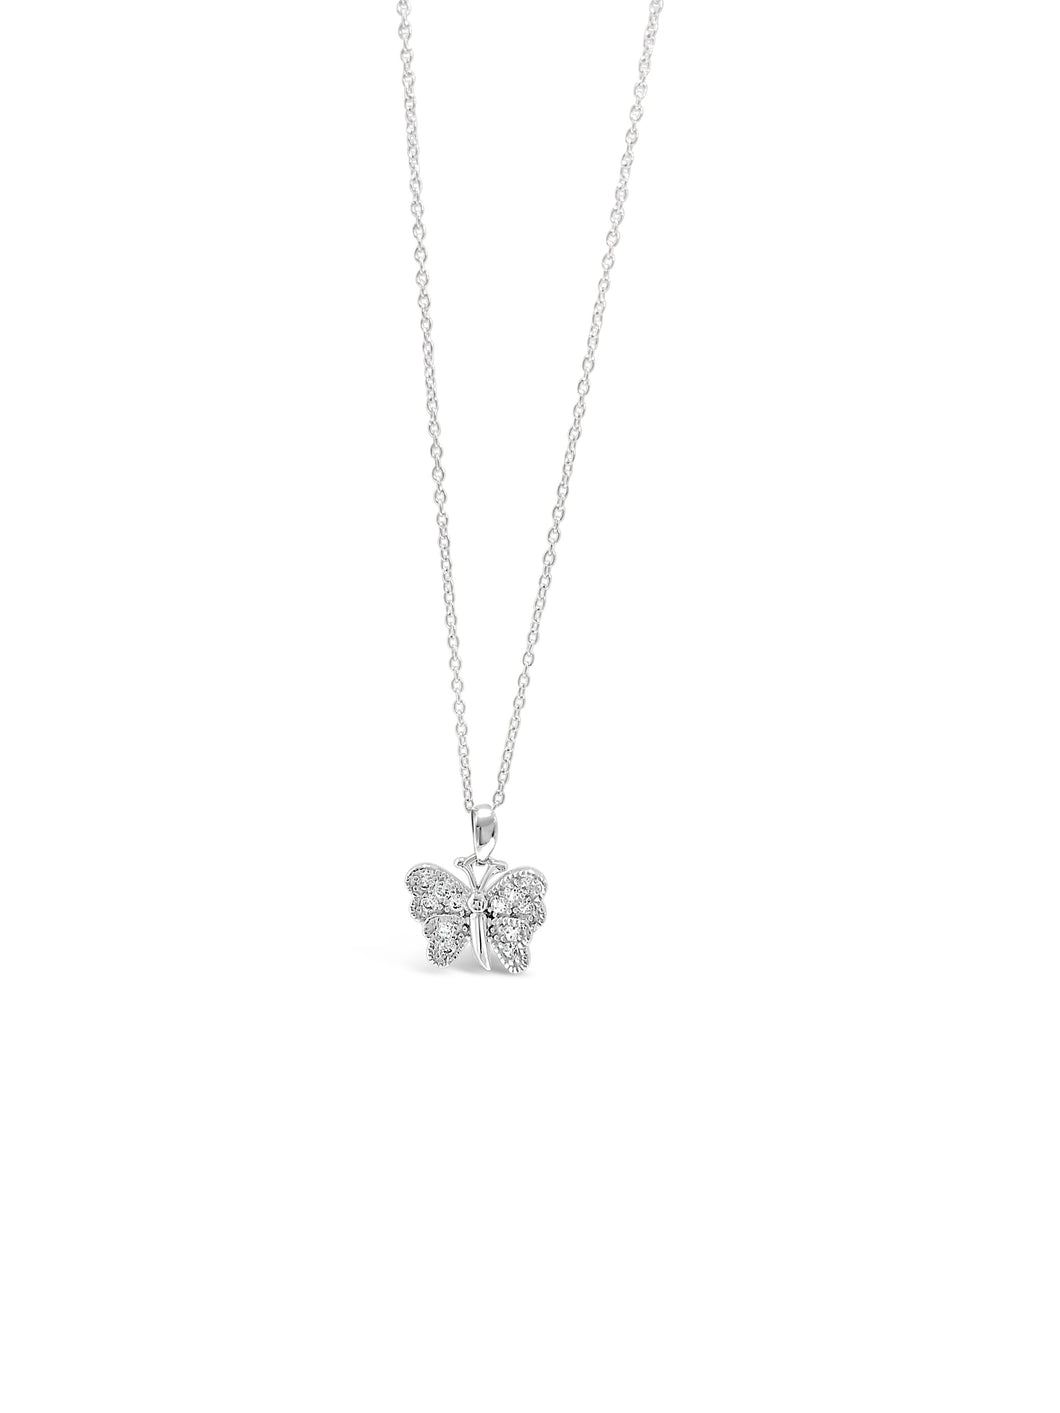 Absolute Jewellery Diamante Butterfly Necklace HCP208